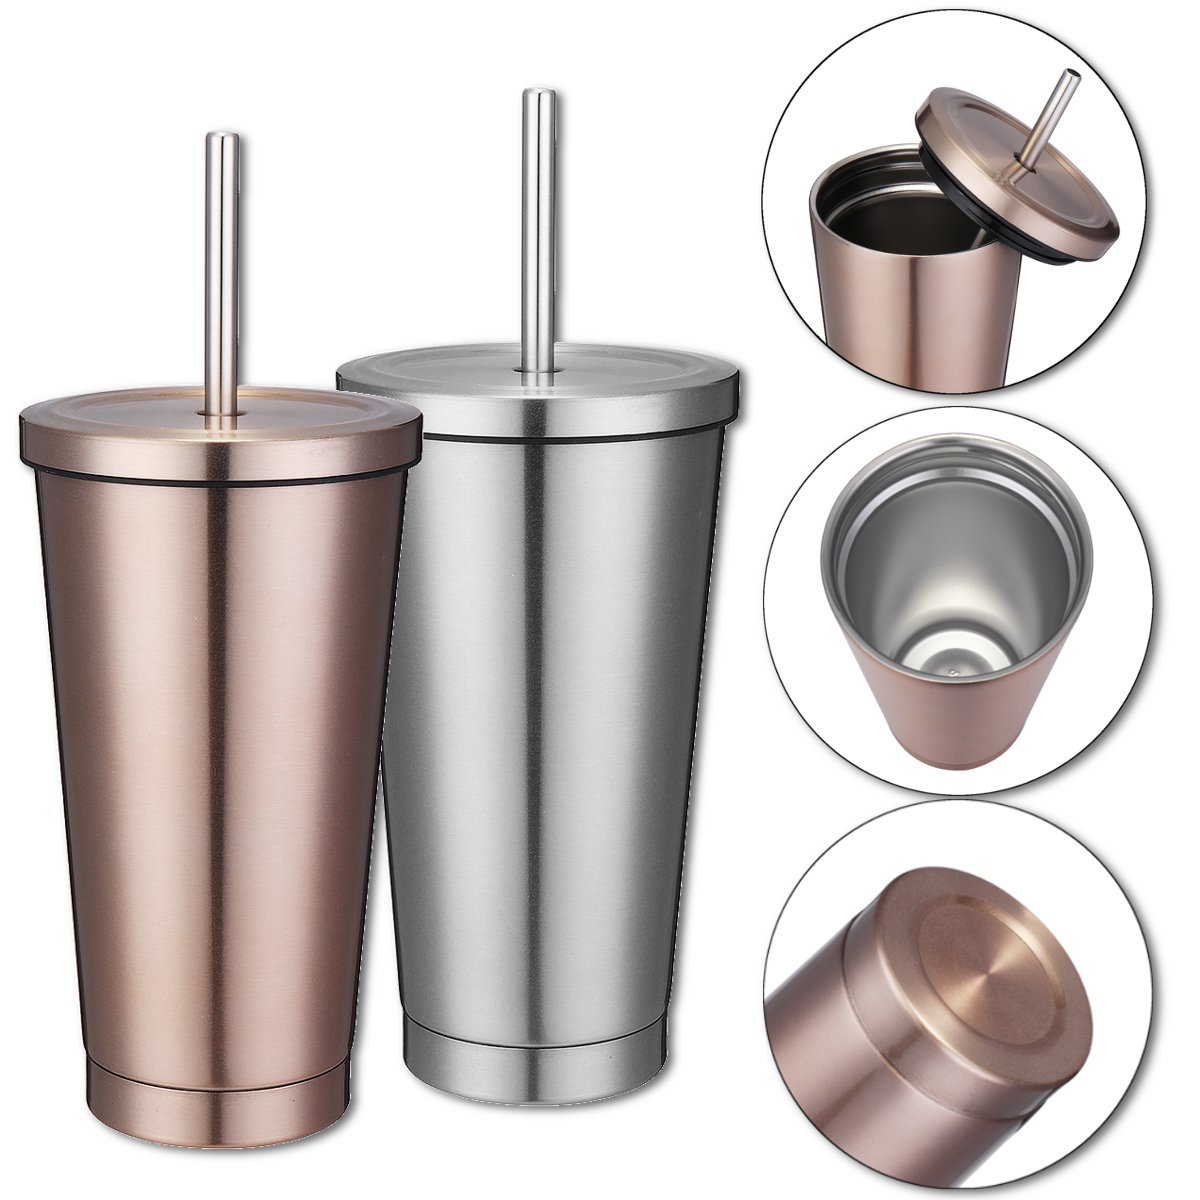 

500ml Stainless Steel Mug Portable Home And Office Tumbler Coffee Ice Cup With Drinking Straw, Silver;gold